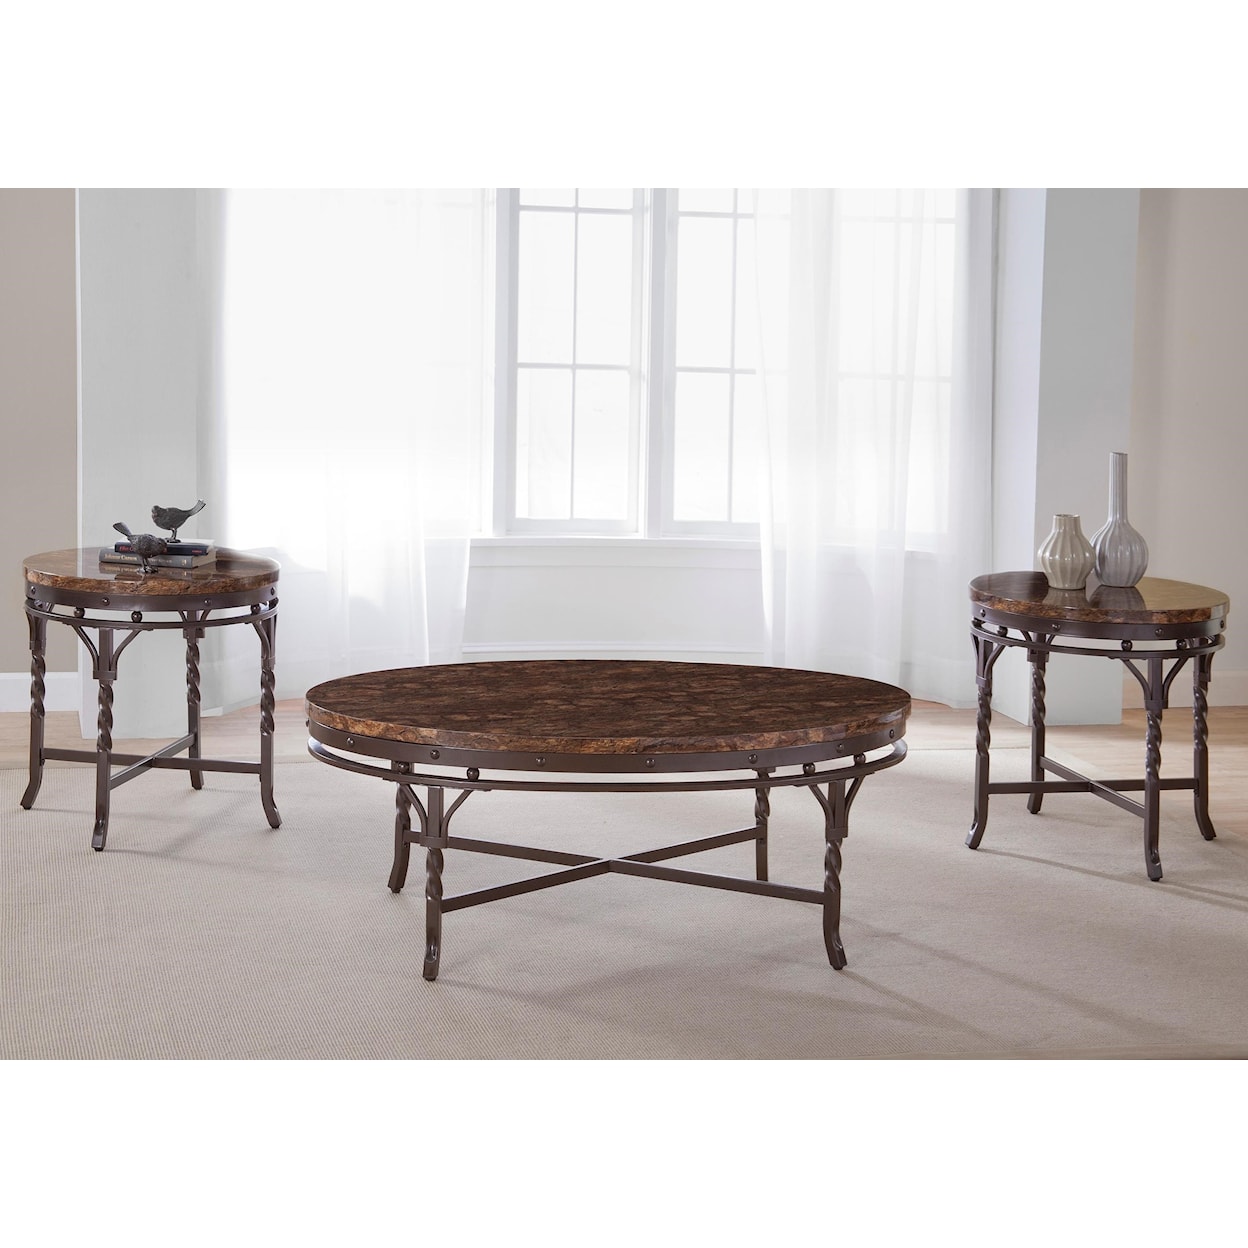 Bernards Tuscan Faux Marble 3-Pack Table Set